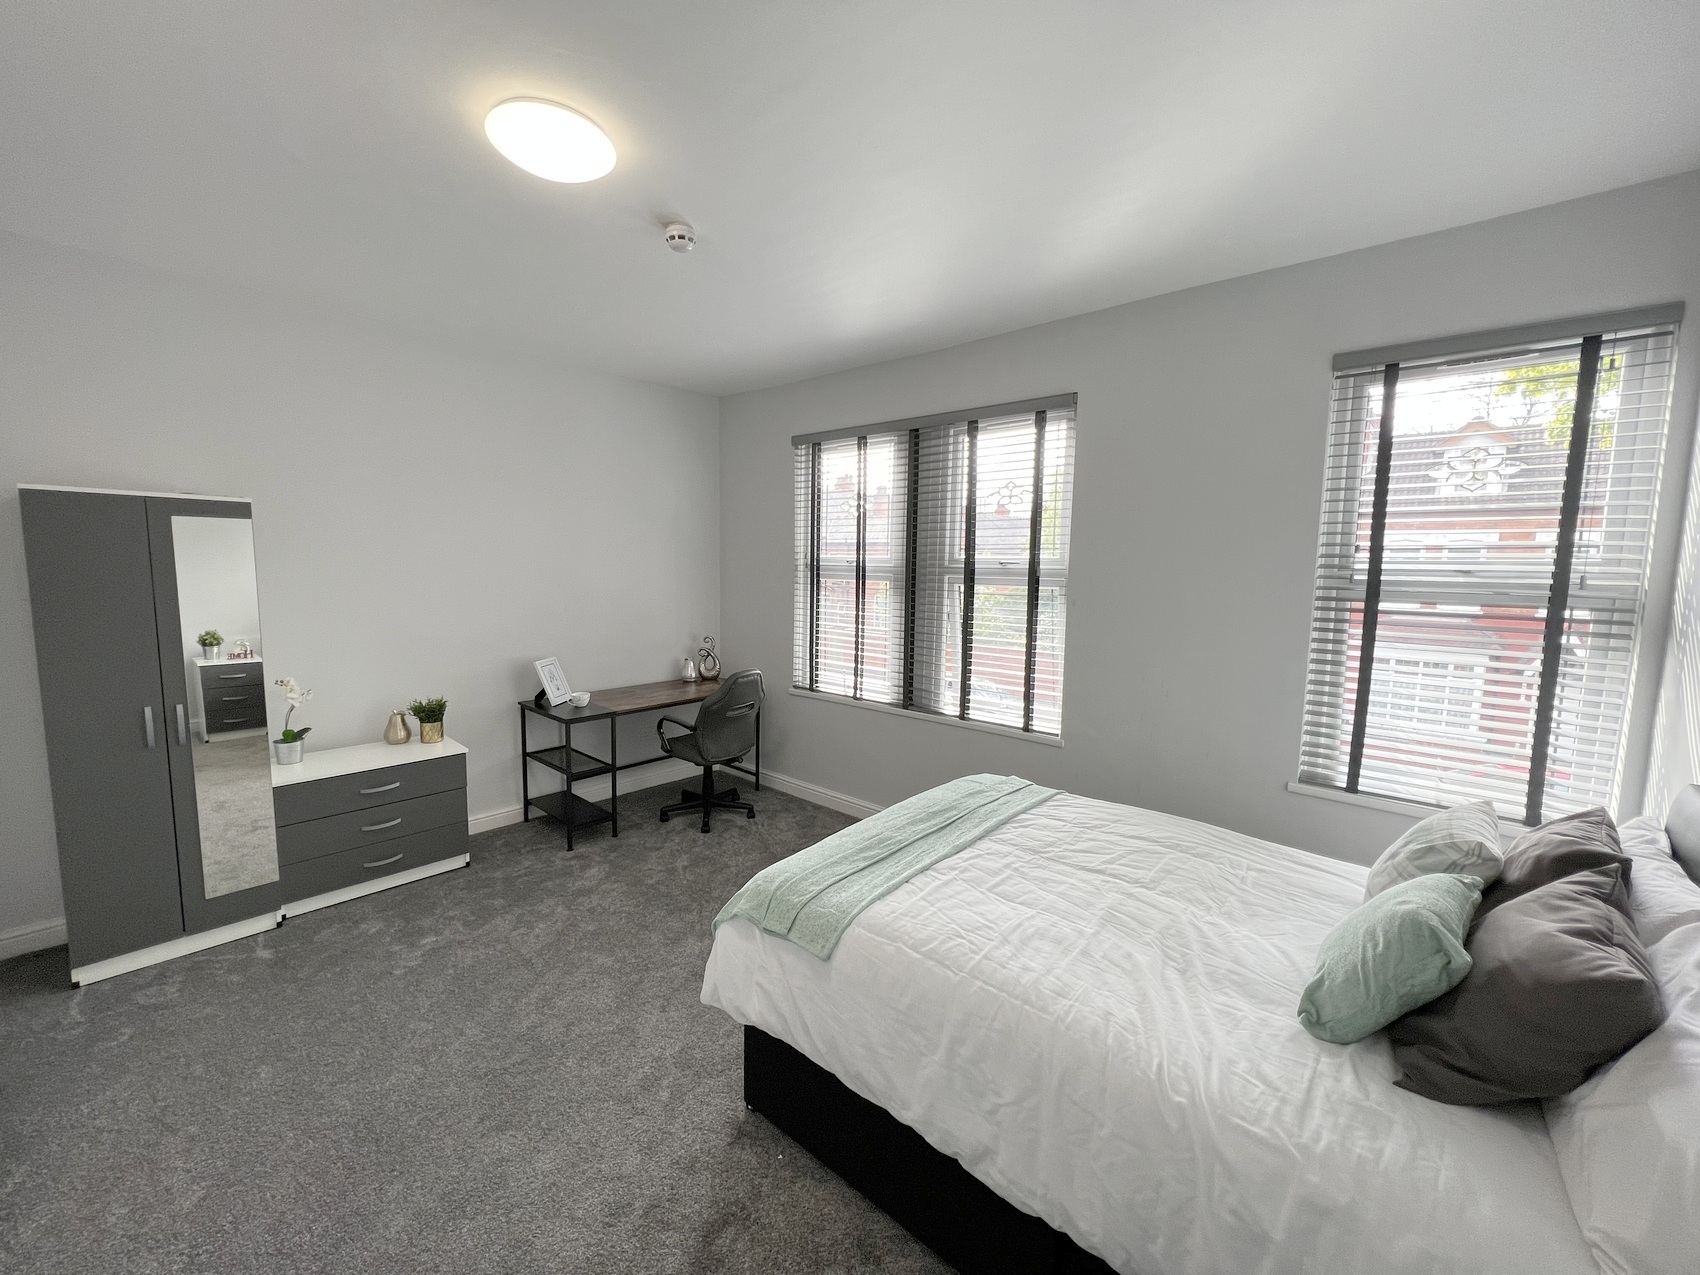 Luxurious Brand NEW Rooms Near Moseley Village! – Room 5